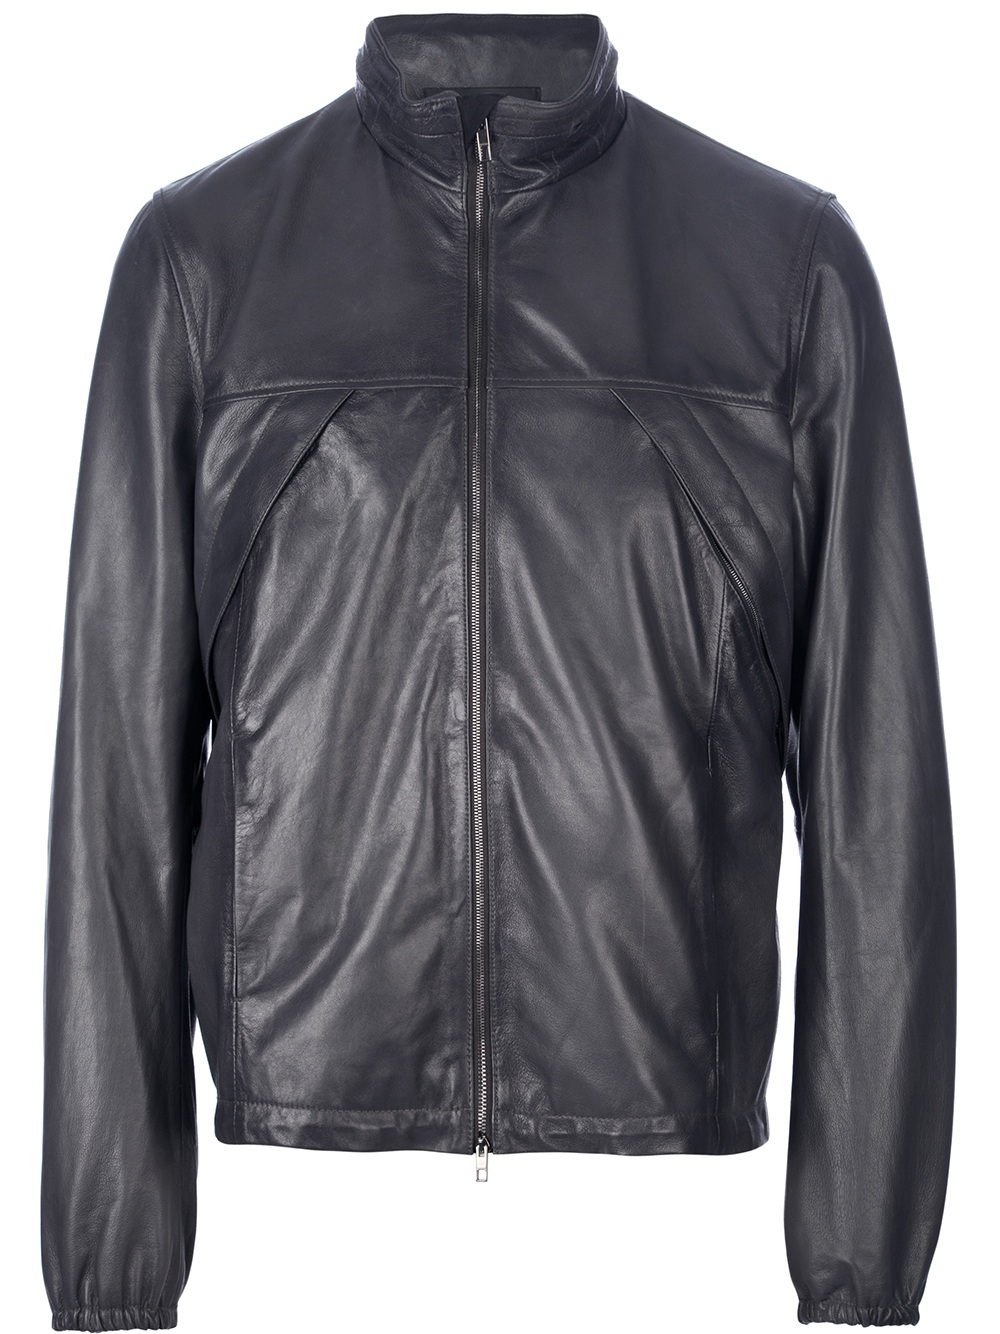 Valentino Funnel Neck Leather Jacket in Grey (Gray) for Men - Lyst